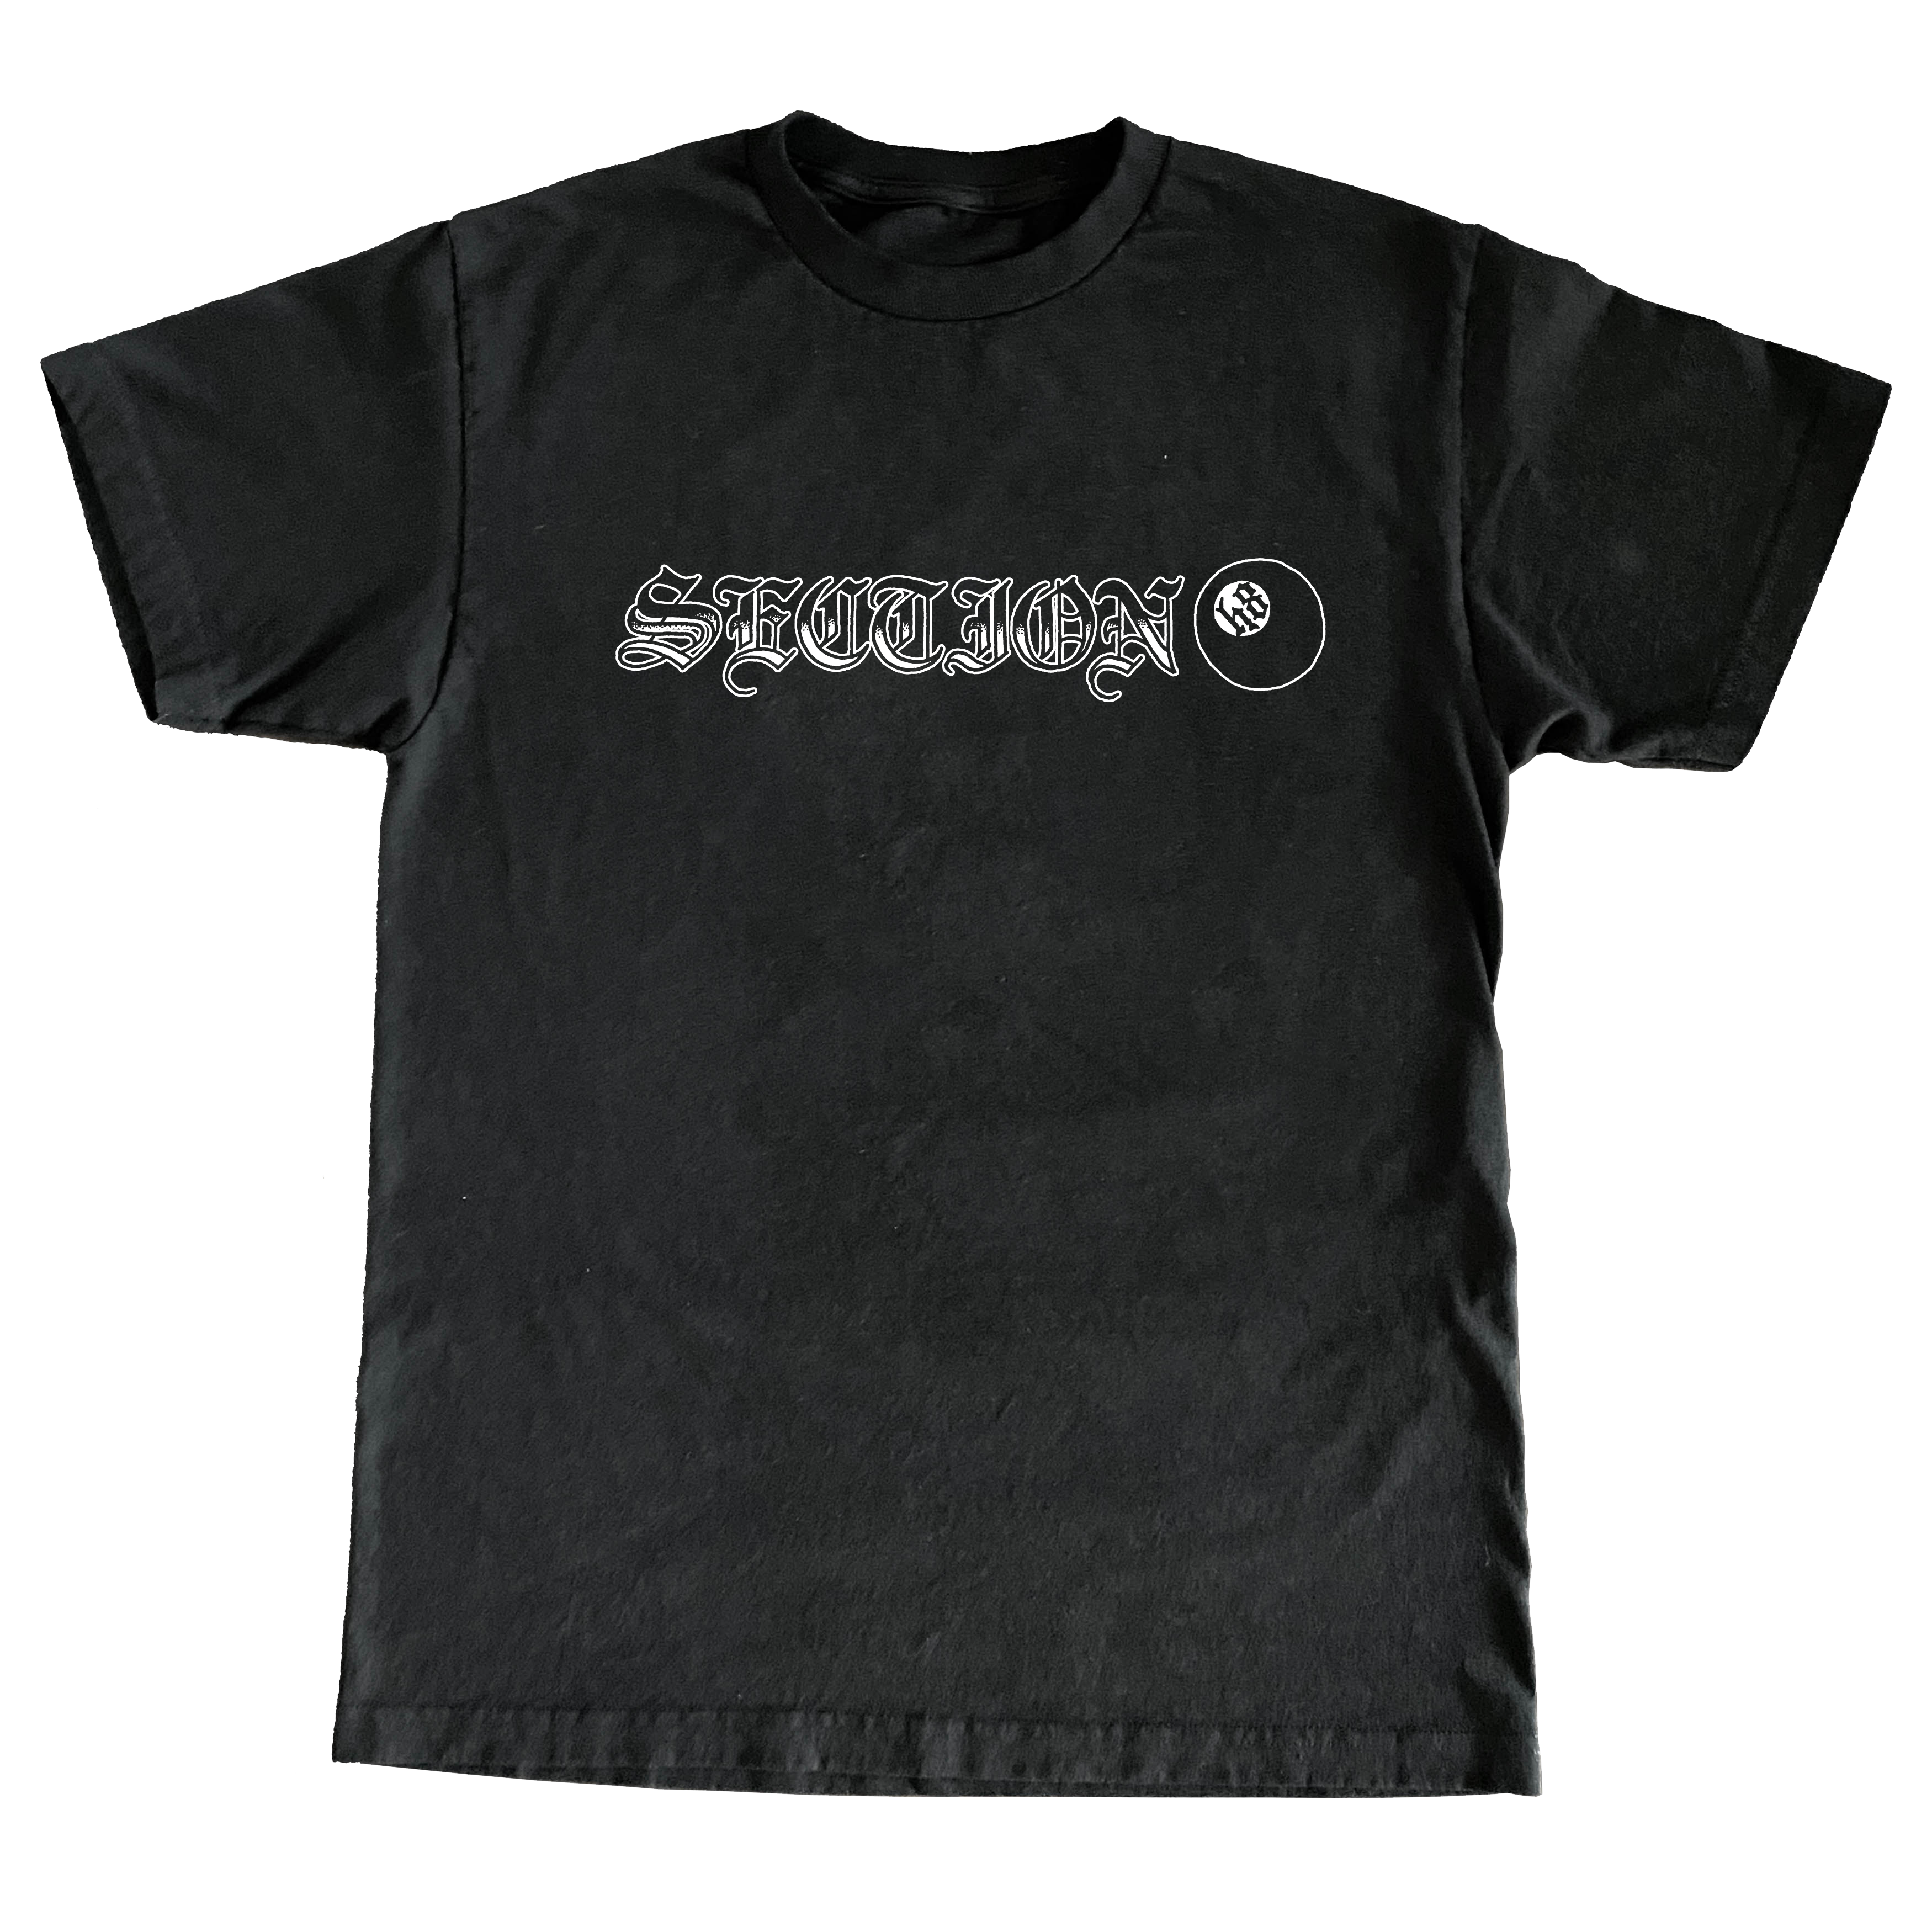 Section H8 - Logo Tee